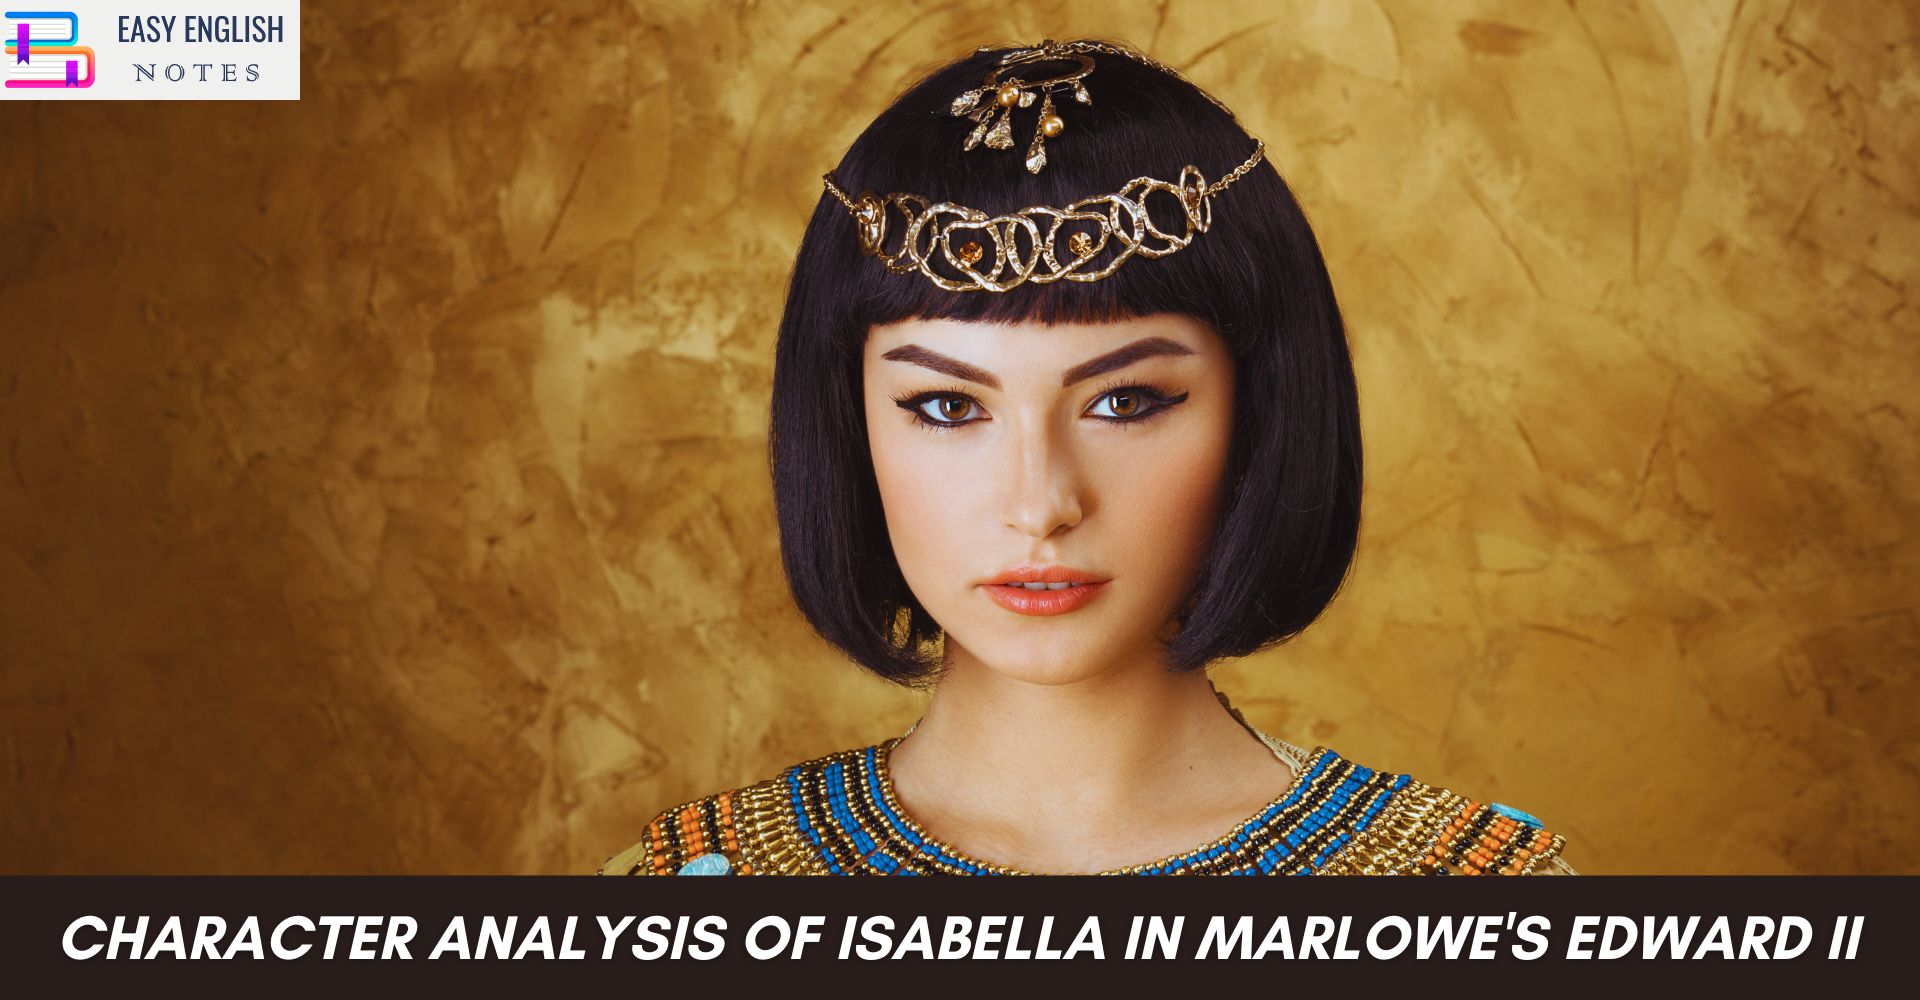 Character Analysis of Isabella in Marlowe's Edward II